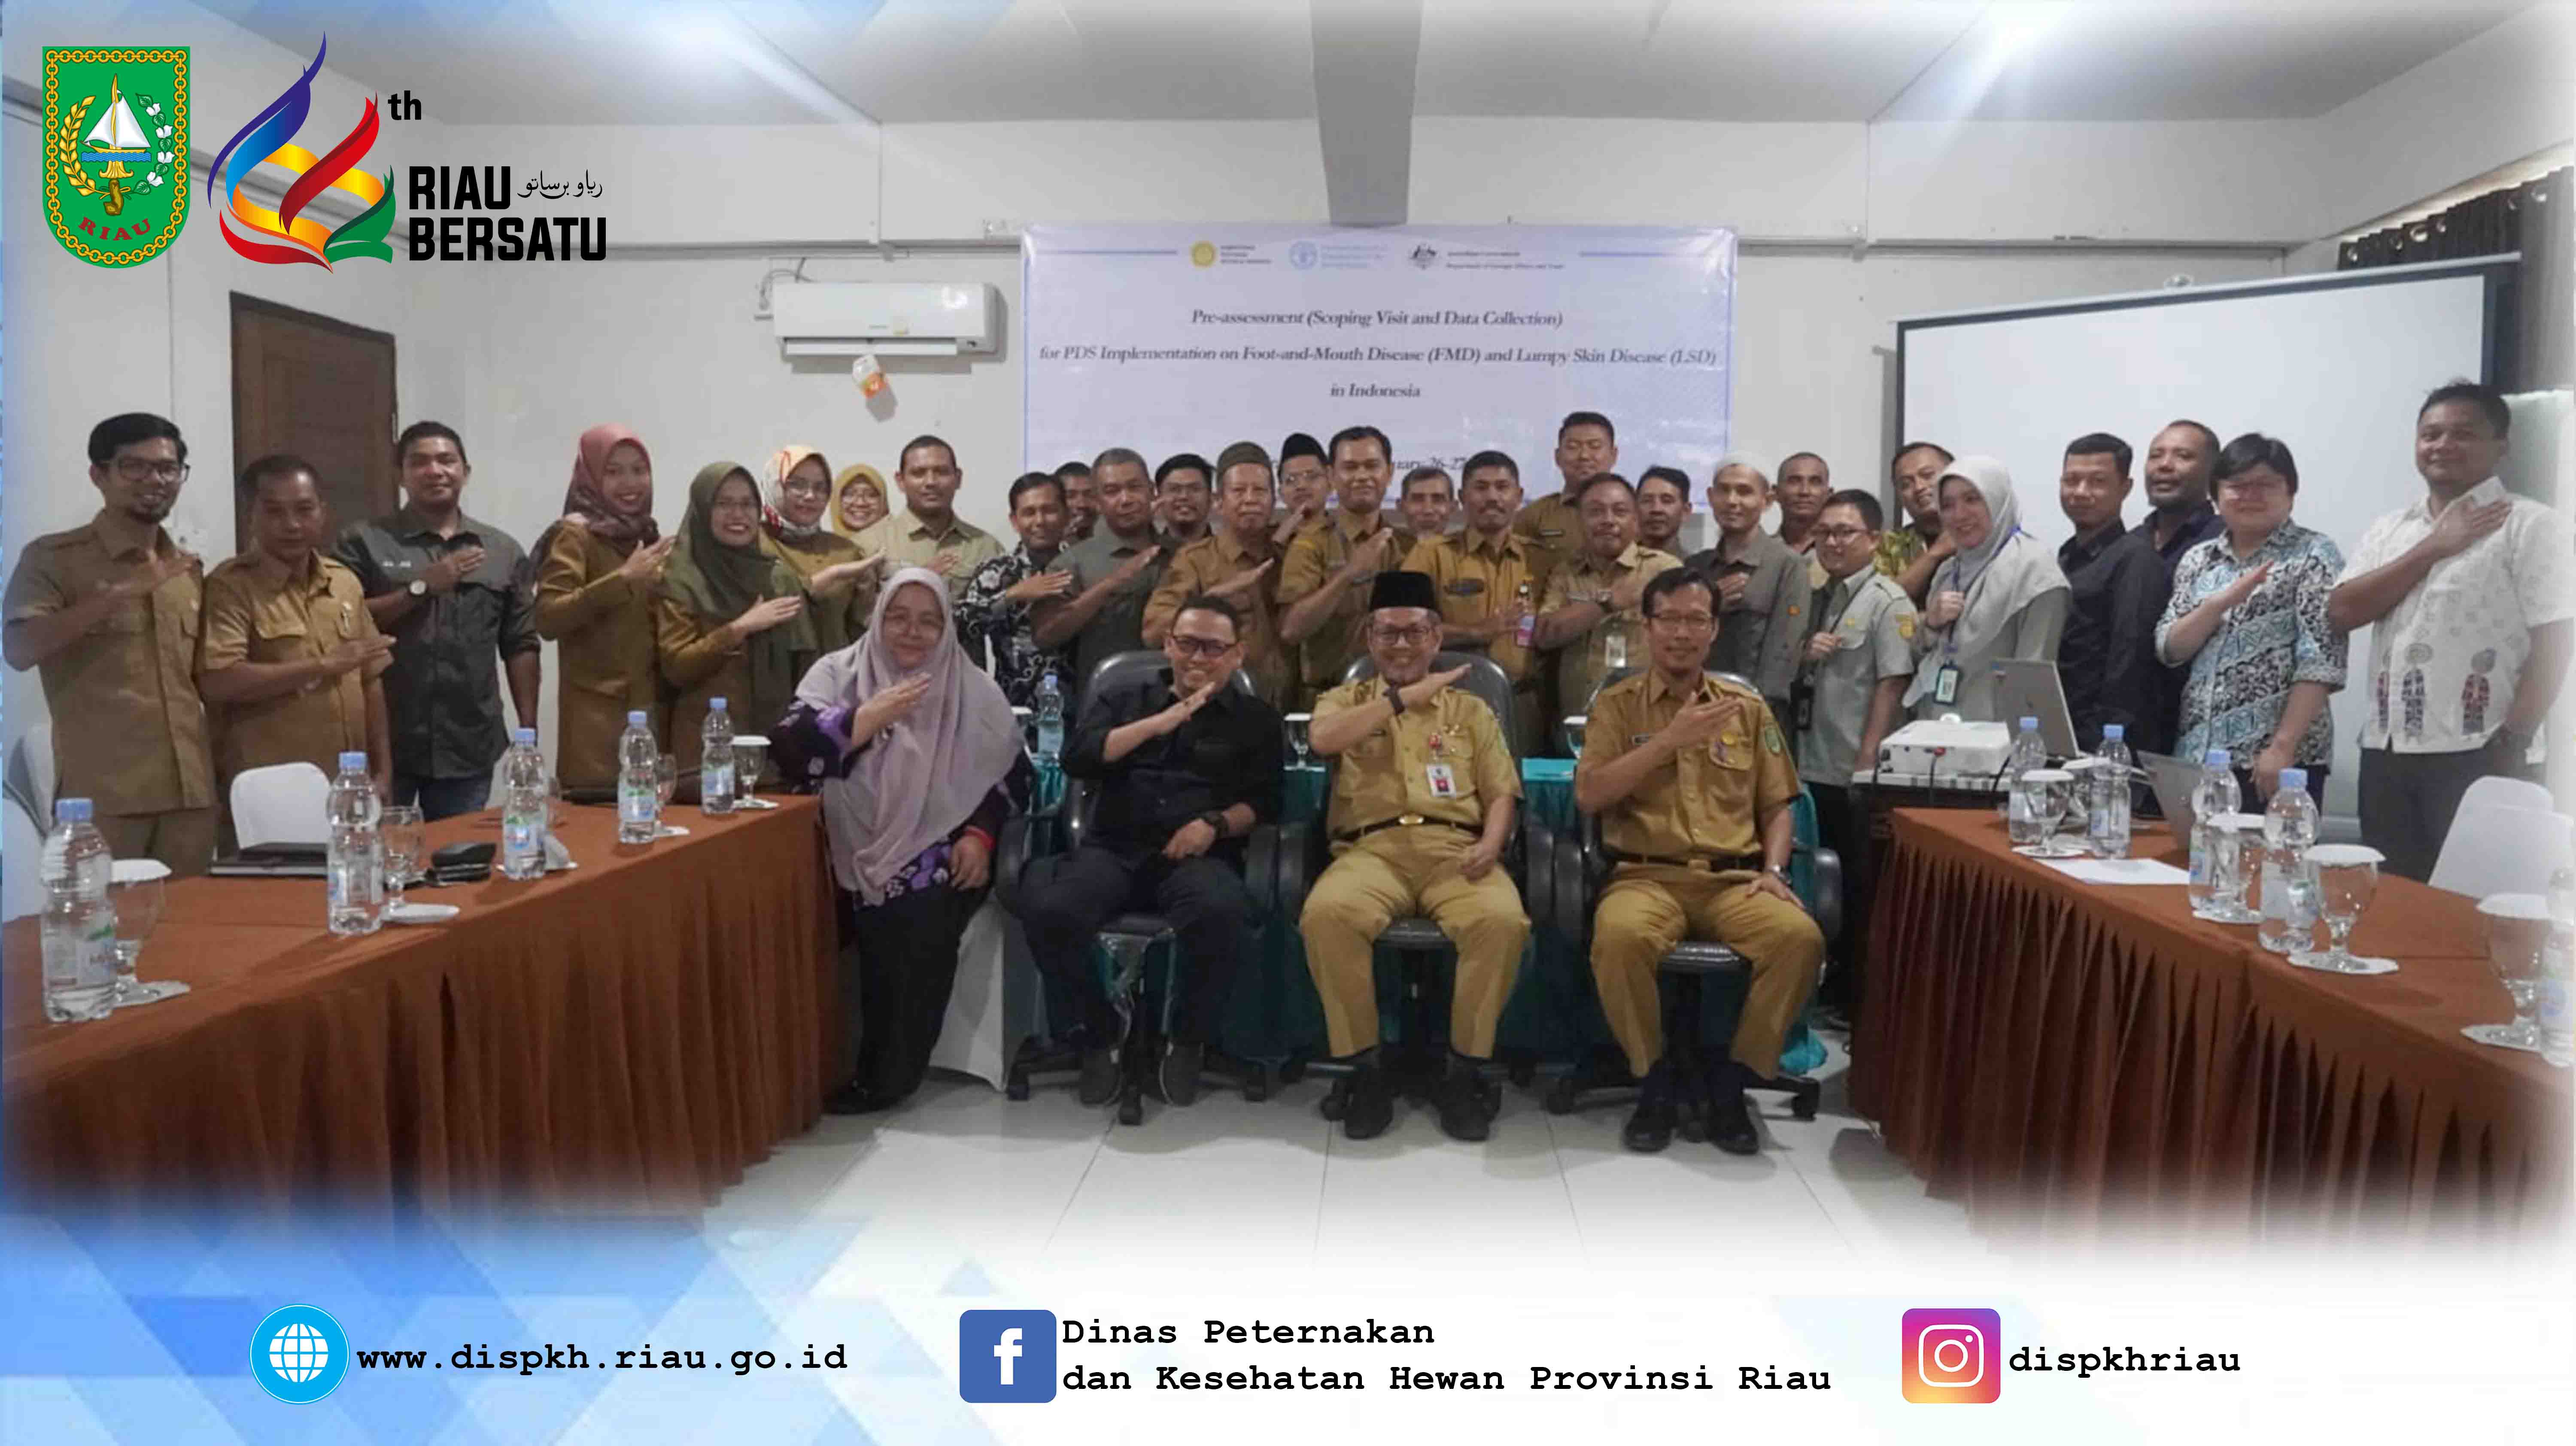 Pre Assessment (Scooping Visit and Data Collection) for PDS Implementation on Foot-and-Mouth Disease (FMD) and Lumpy Skin Disease (LSD) in Indonesia